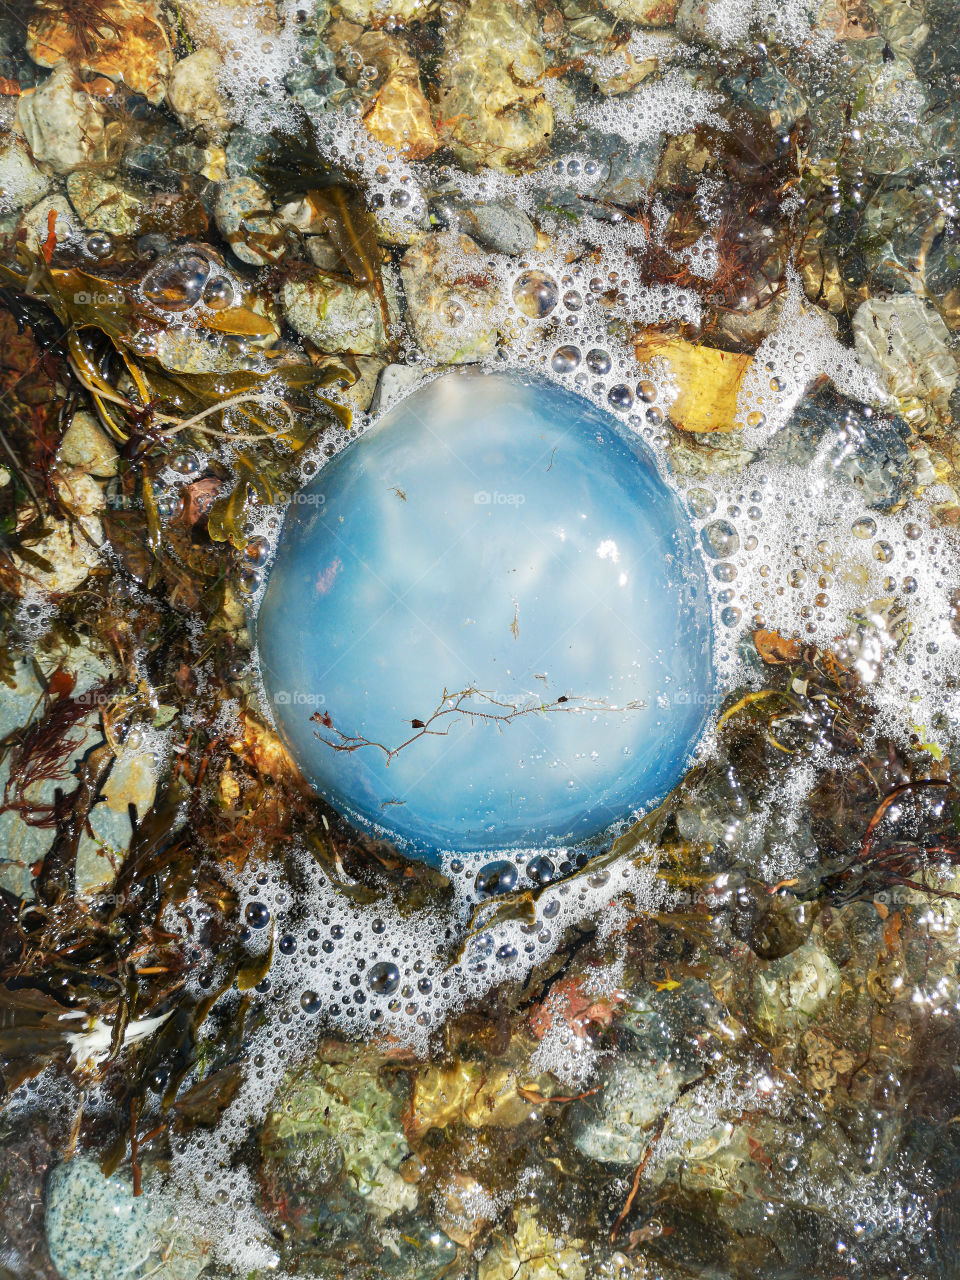 Blue jellyfish (Cyanea lamarckii) washed inshore during low tide on pebbles beach